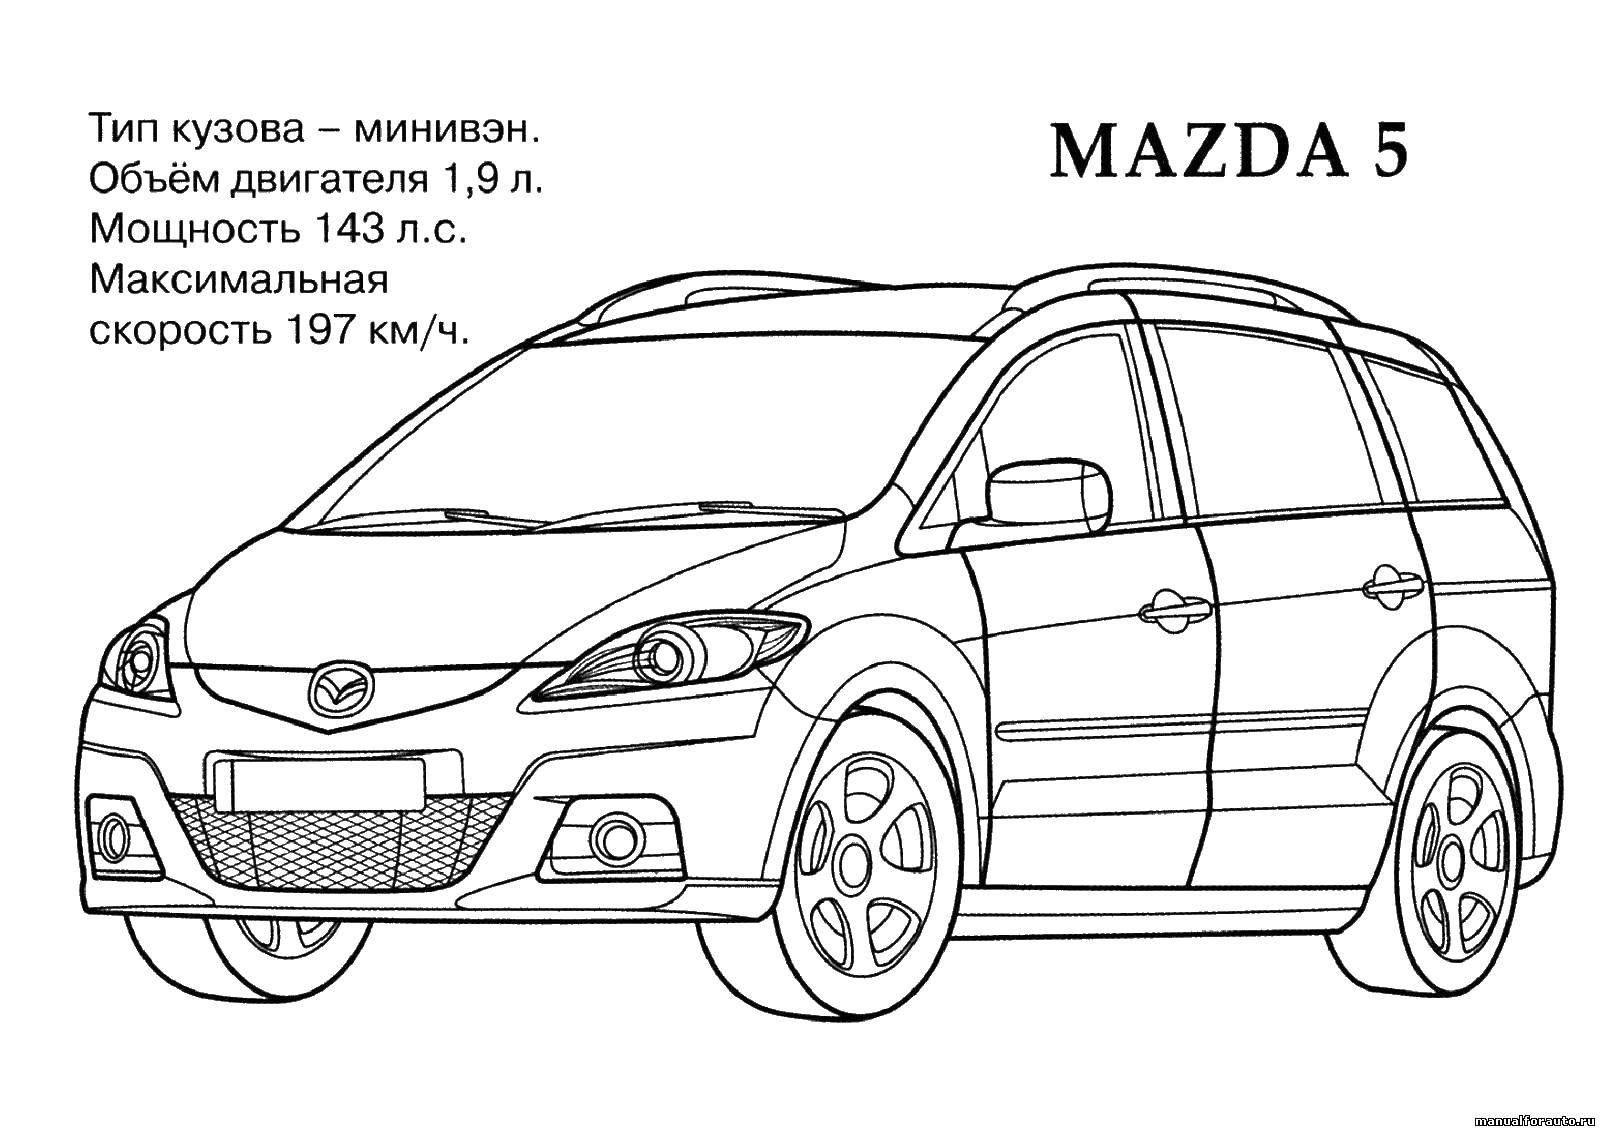 Coloring Mazda 5. Category coloring. Tags:  Transport, car.